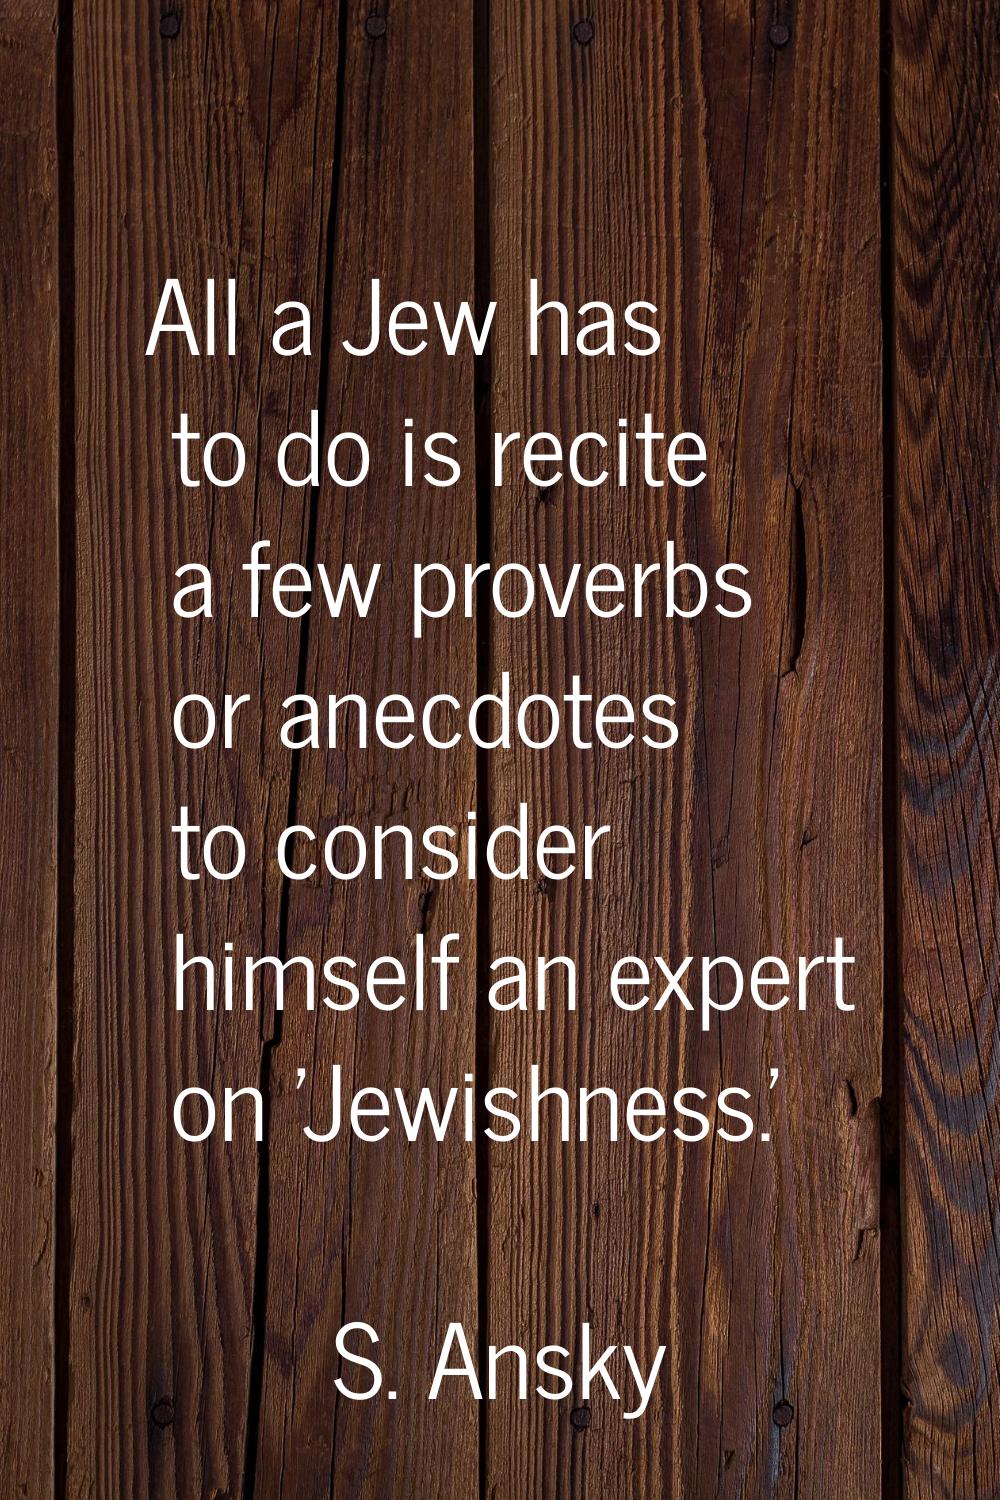 All a Jew has to do is recite a few proverbs or anecdotes to consider himself an expert on 'Jewishn